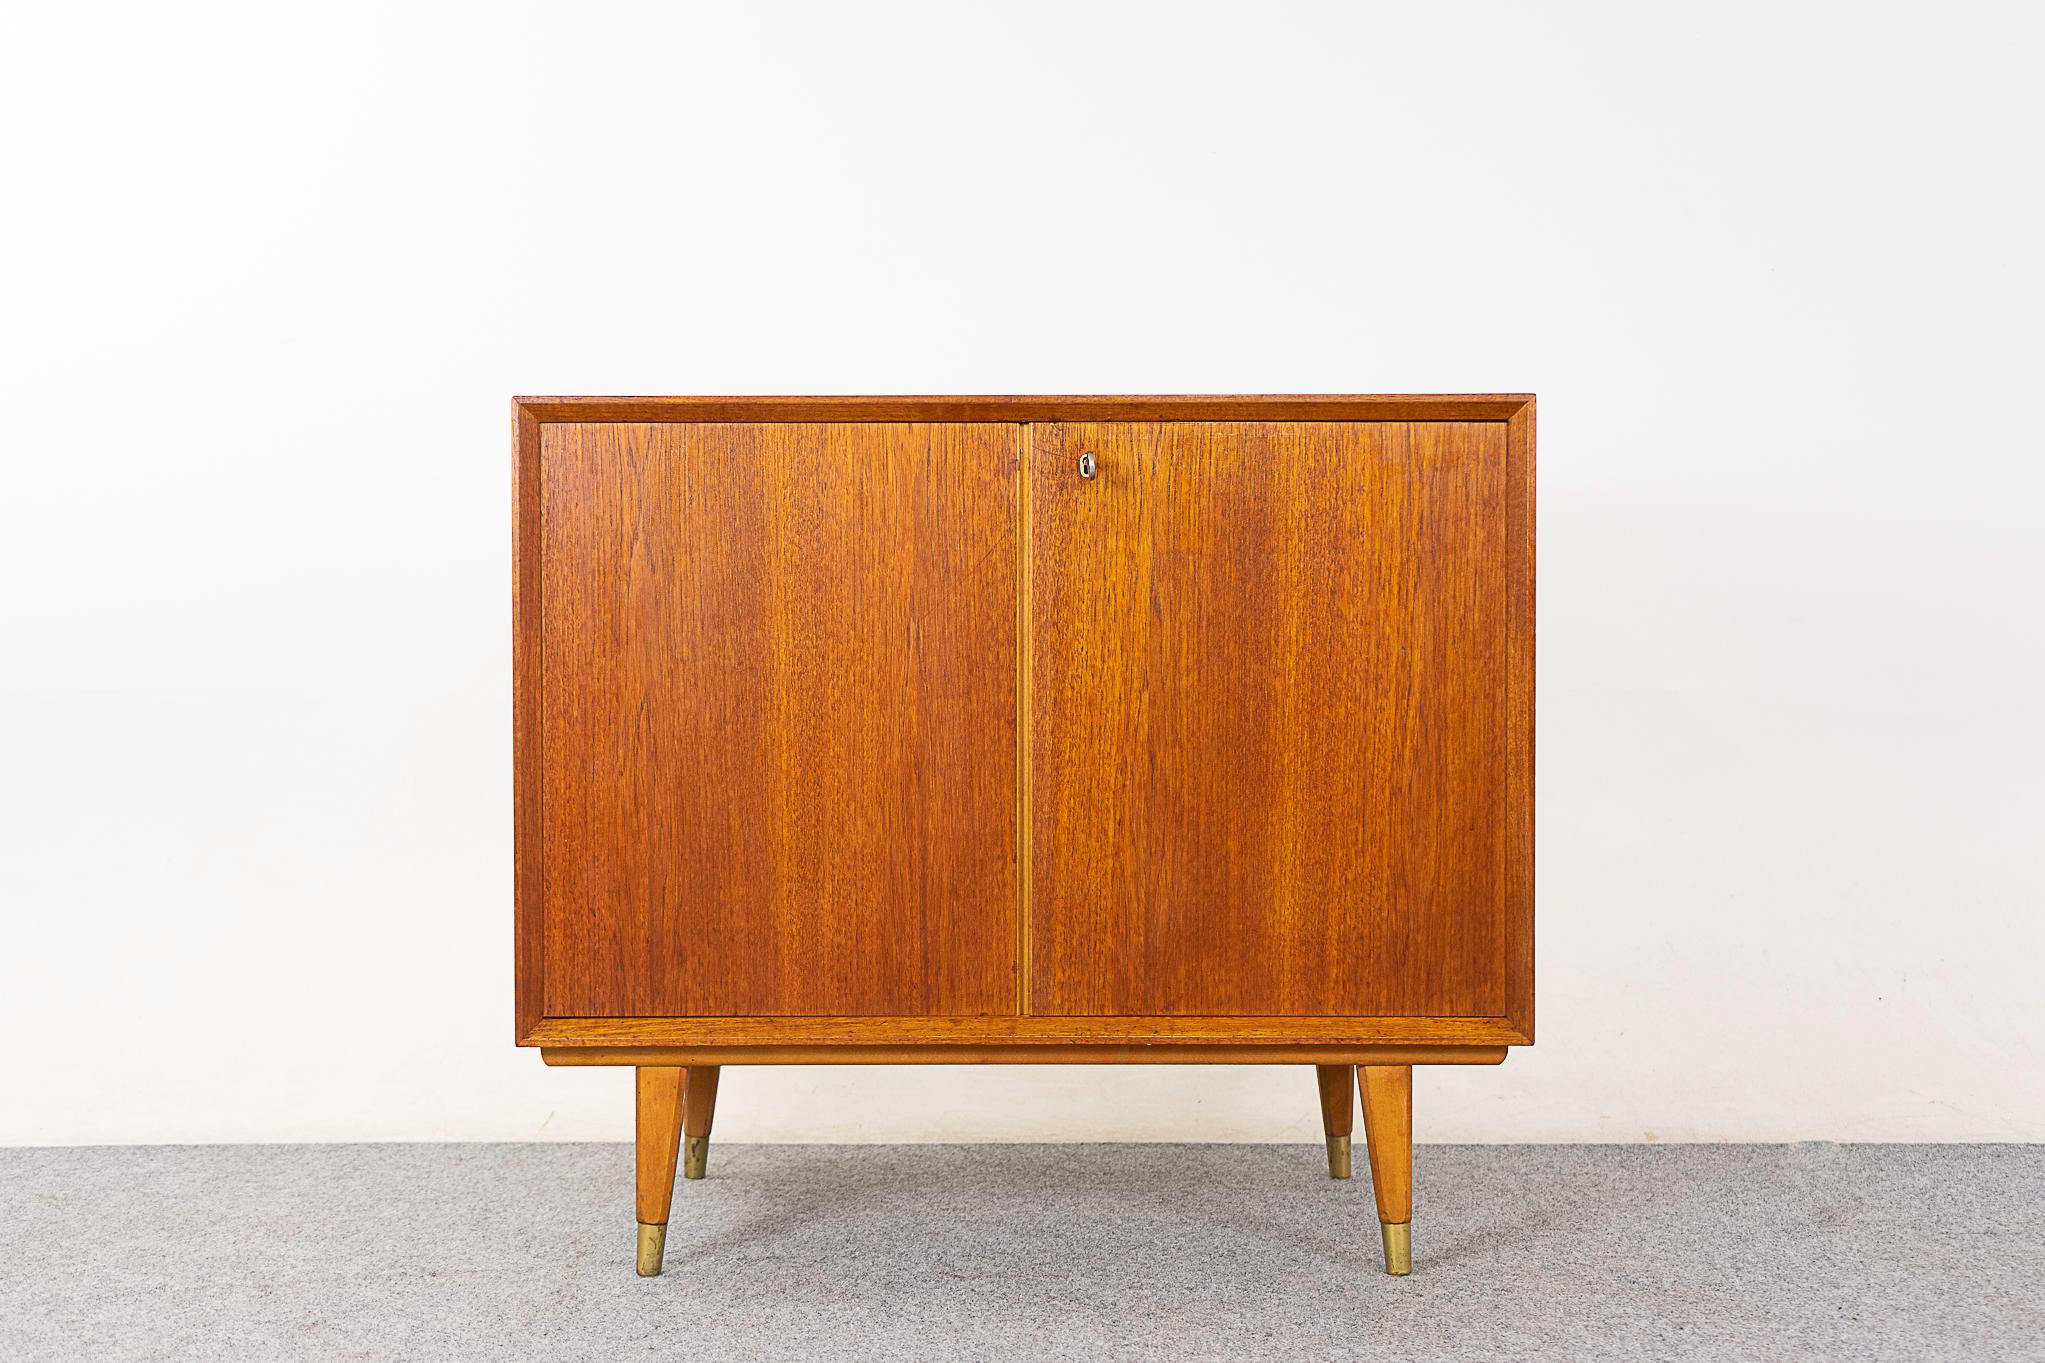 Teak mid-century cabinet, circa 1960's. Clean, simple lined design with beveled front edges and book-matched veneer throughout. Lockable doors, metal capped slender legs, sleek drawer and a fixed height shelf.  

Please inquire for remote and